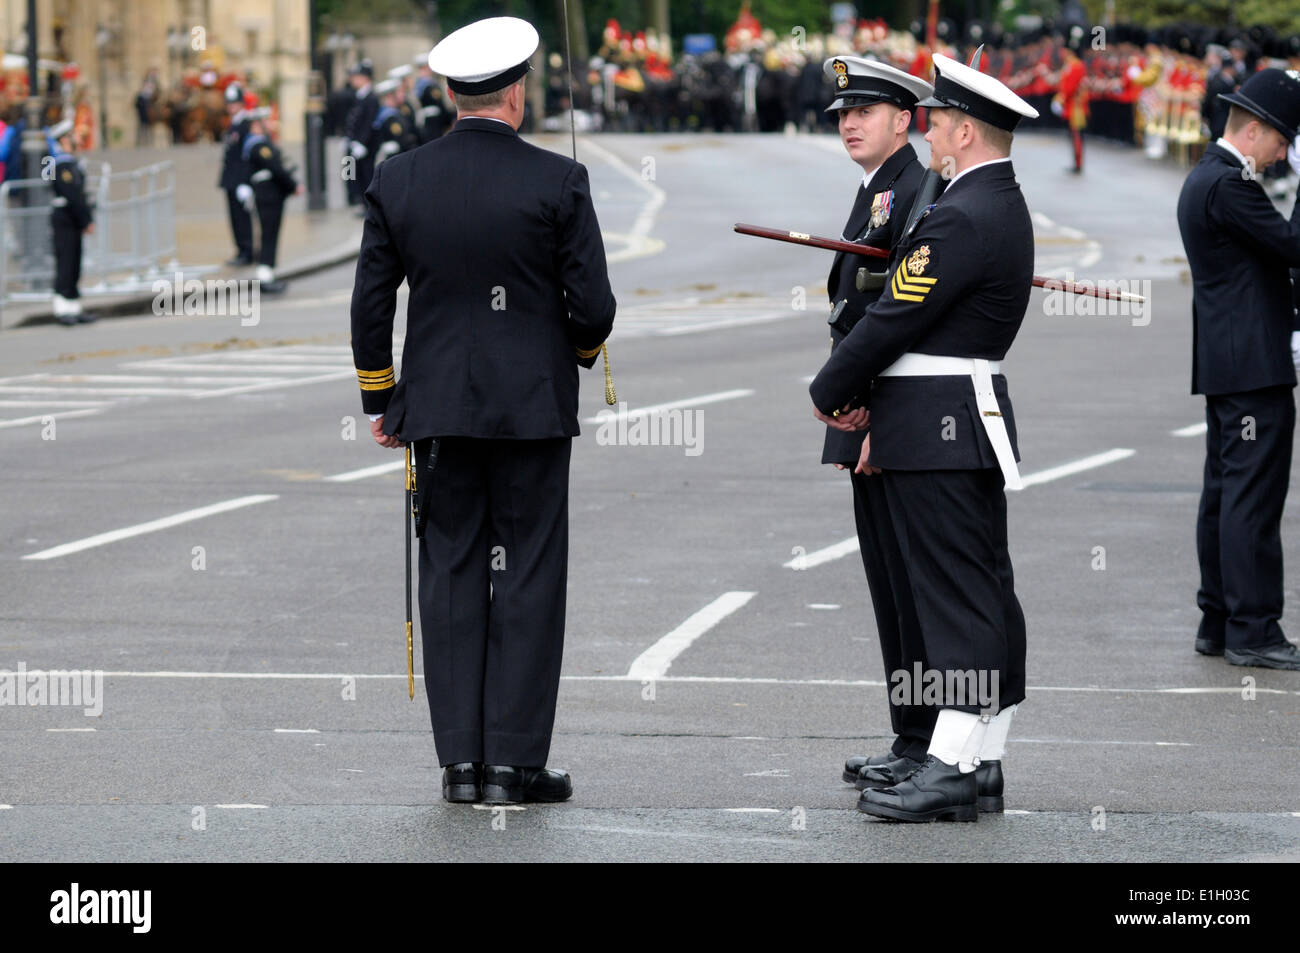 London, UK. 04th June, 2014. The State Opening of Parliament, Westminster, London. Members of the armed forces on duty in Parliament Square while the Queen is making her speech inside. Stock Photo